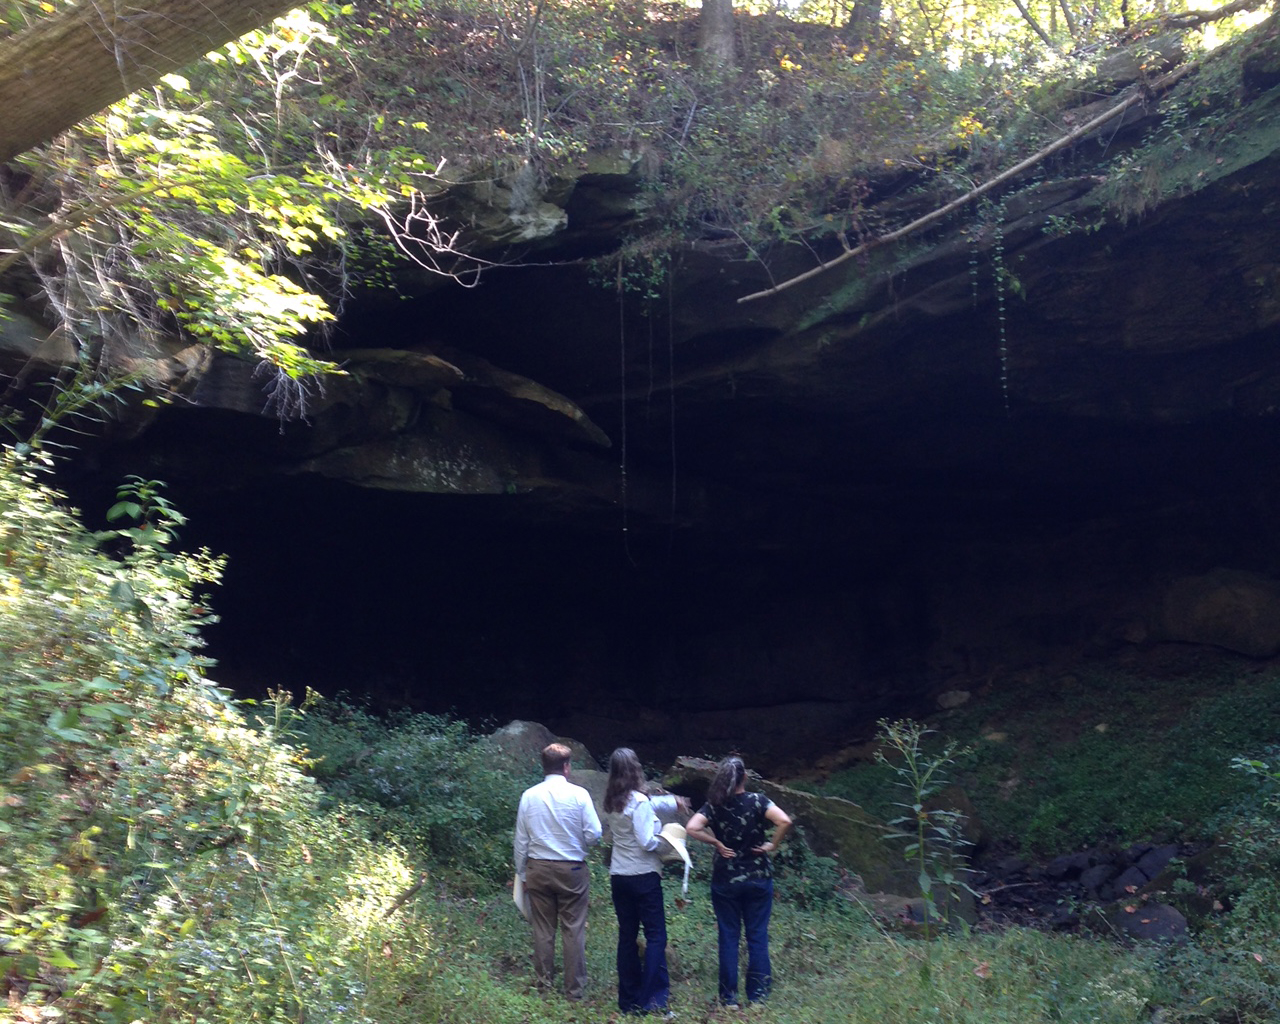 Three people stand at the mouth of a wooded cave